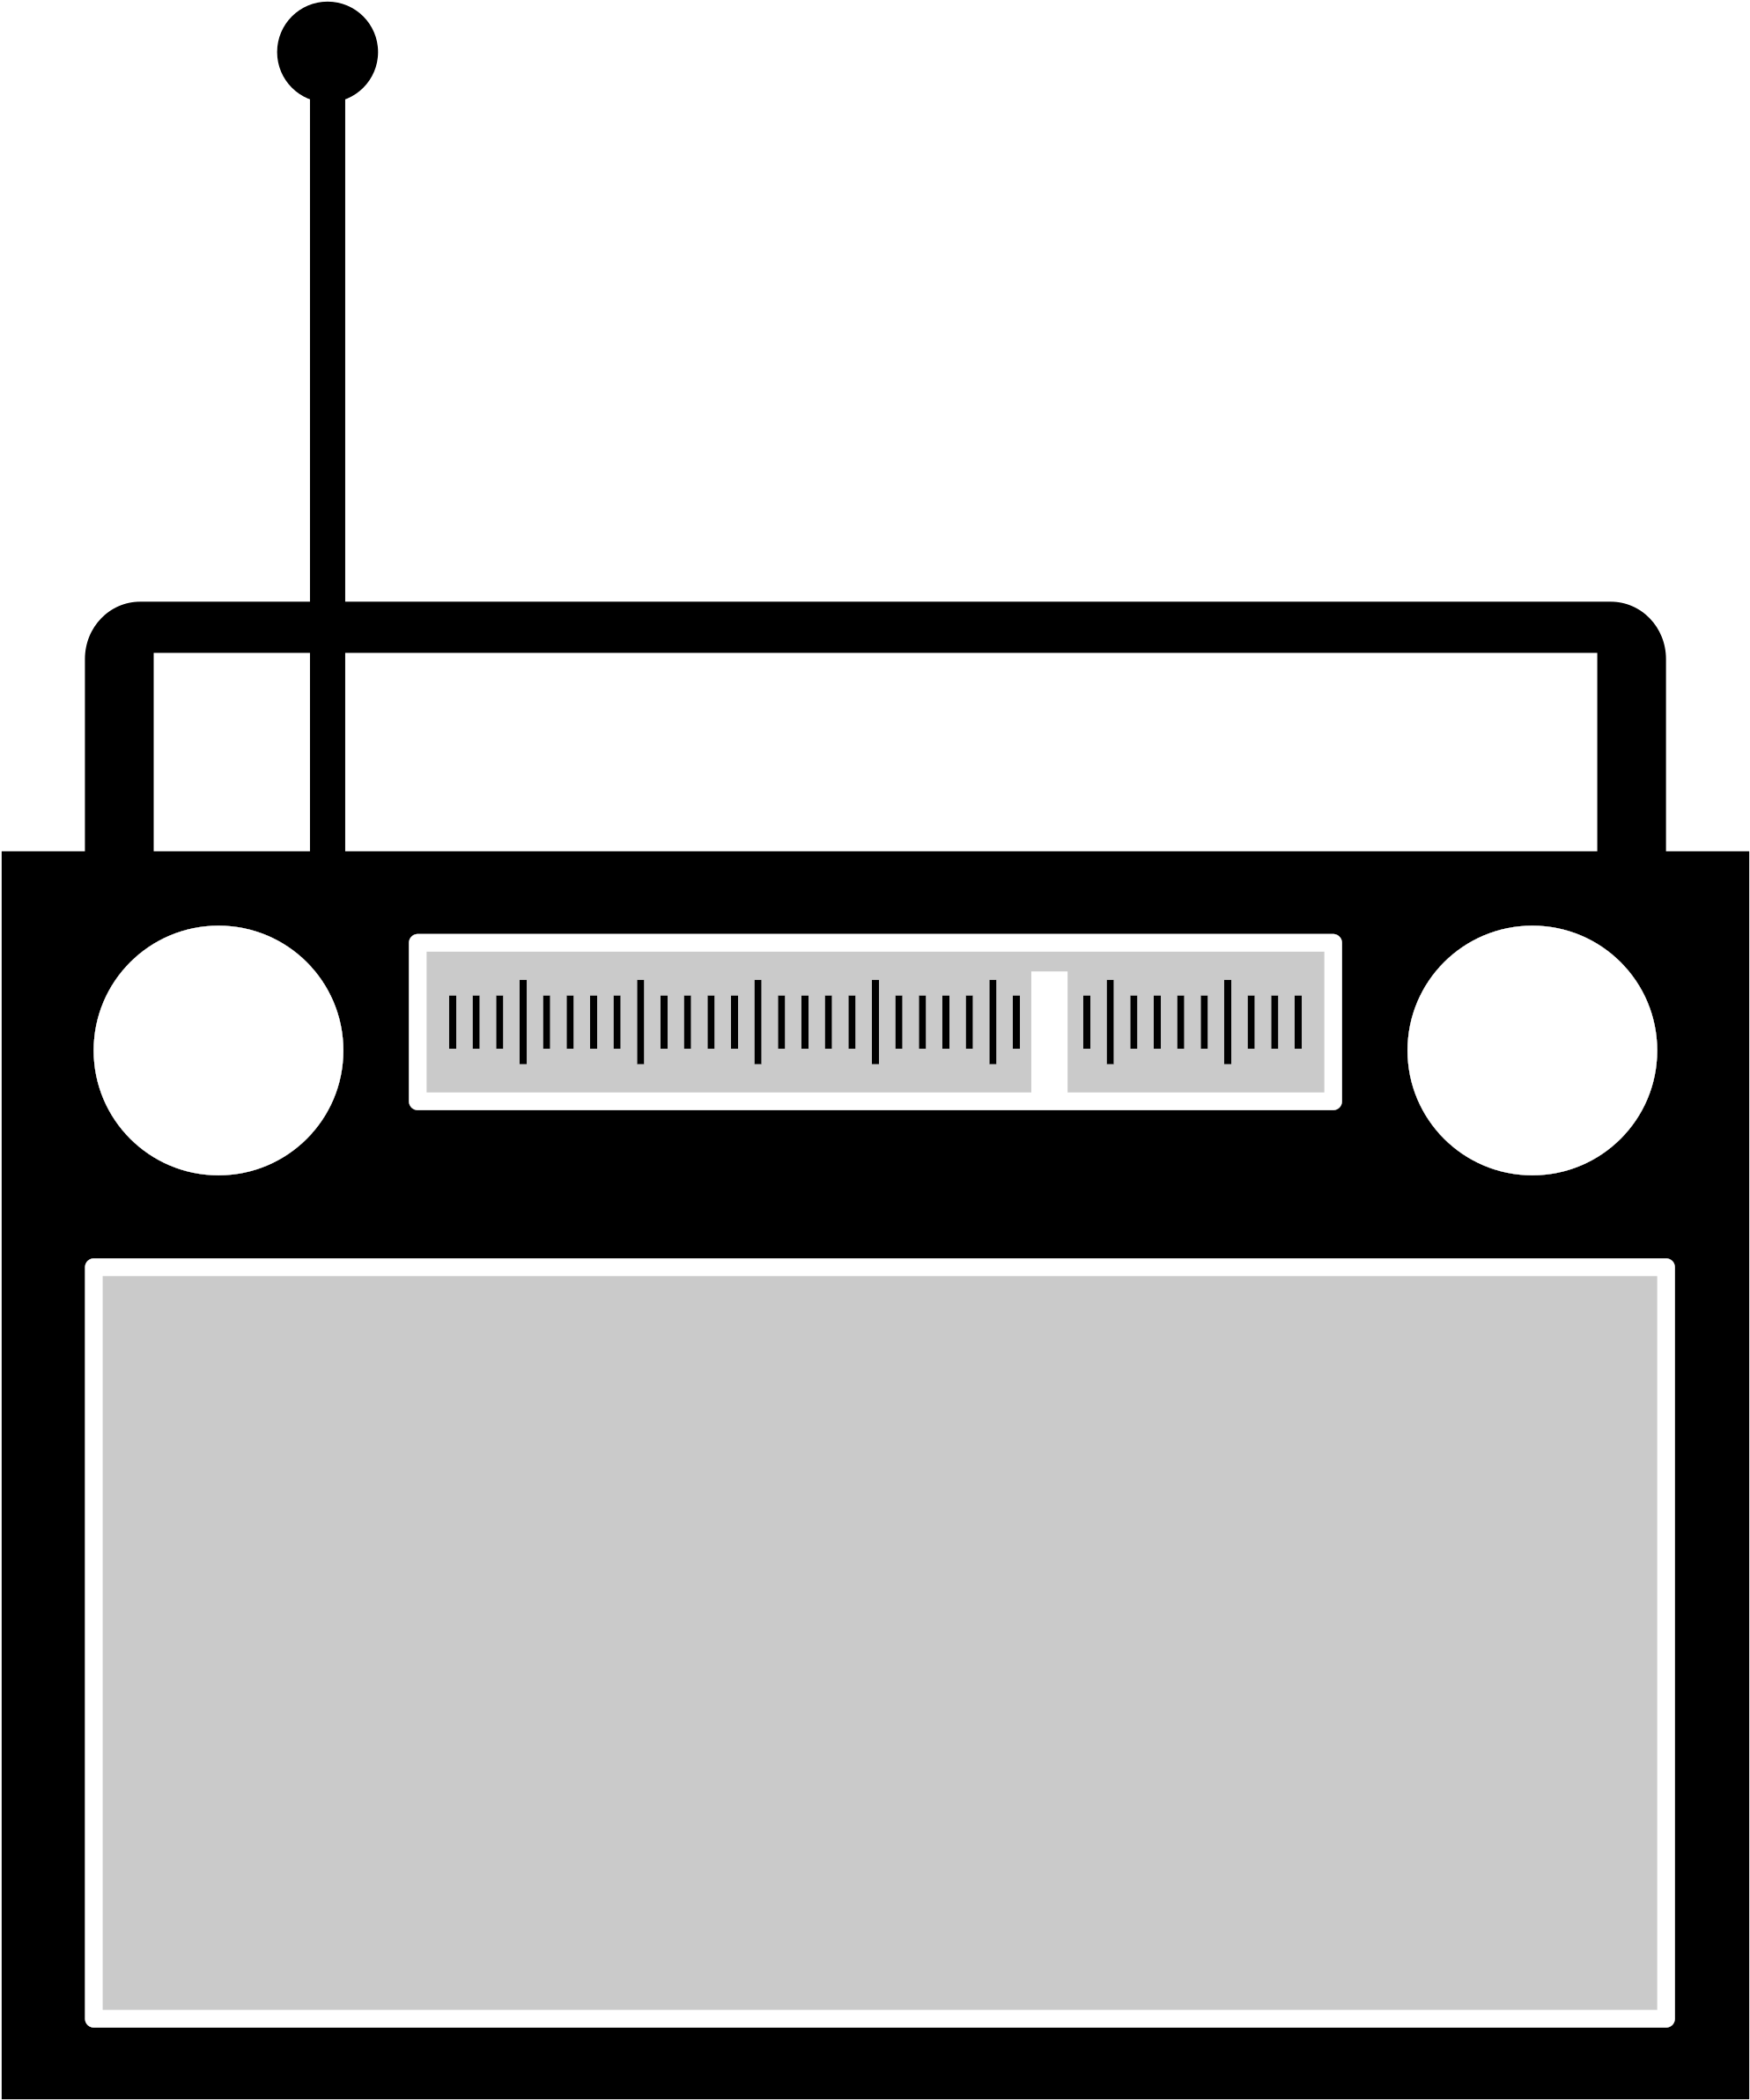 A Black And White Object With A Square Object In The Middle